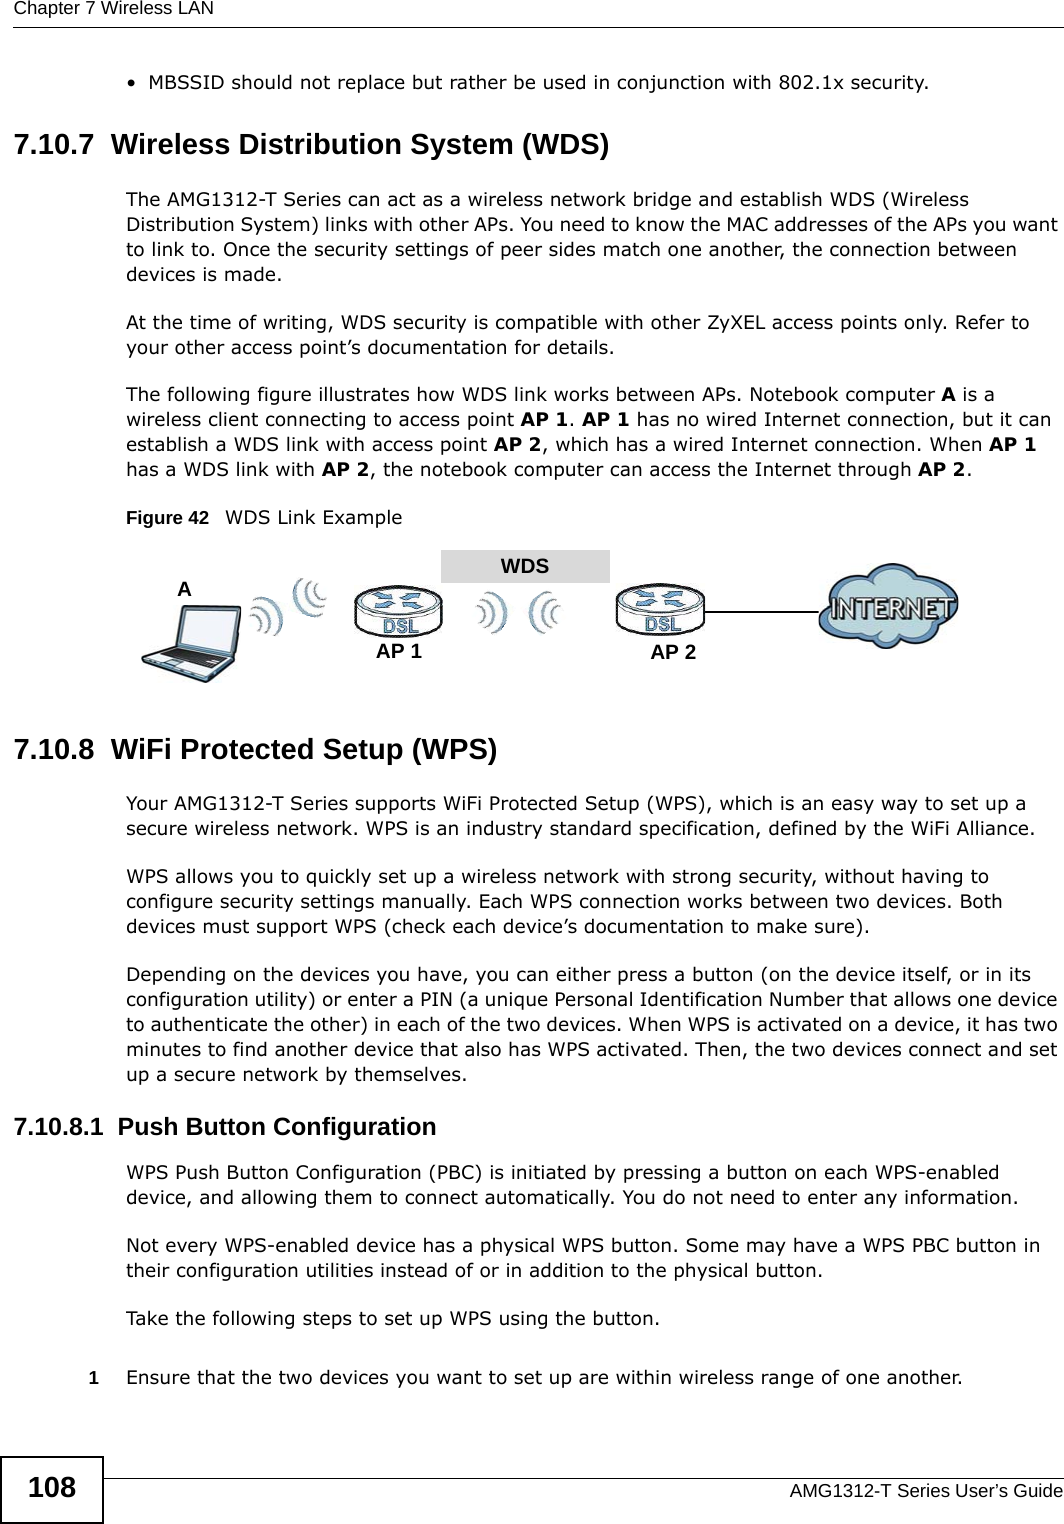 Chapter 7 Wireless LANAMG1312-T Series User’s Guide108• MBSSID should not replace but rather be used in conjunction with 802.1x security.7.10.7  Wireless Distribution System (WDS)The AMG1312-T Series can act as a wireless network bridge and establish WDS (Wireless Distribution System) links with other APs. You need to know the MAC addresses of the APs you want to link to. Once the security settings of peer sides match one another, the connection between devices is made.At the time of writing, WDS security is compatible with other ZyXEL access points only. Refer to your other access point’s documentation for details.The following figure illustrates how WDS link works between APs. Notebook computer A is a wireless client connecting to access point AP 1. AP 1 has no wired Internet connection, but it can establish a WDS link with access point AP 2, which has a wired Internet connection. When AP 1 has a WDS link with AP 2, the notebook computer can access the Internet through AP 2.Figure 42   WDS Link Example7.10.8  WiFi Protected Setup (WPS)Your AMG1312-T Series supports WiFi Protected Setup (WPS), which is an easy way to set up a secure wireless network. WPS is an industry standard specification, defined by the WiFi Alliance.WPS allows you to quickly set up a wireless network with strong security, without having to configure security settings manually. Each WPS connection works between two devices. Both devices must support WPS (check each device’s documentation to make sure). Depending on the devices you have, you can either press a button (on the device itself, or in its configuration utility) or enter a PIN (a unique Personal Identification Number that allows one device to authenticate the other) in each of the two devices. When WPS is activated on a device, it has two minutes to find another device that also has WPS activated. Then, the two devices connect and set up a secure network by themselves.7.10.8.1  Push Button ConfigurationWPS Push Button Configuration (PBC) is initiated by pressing a button on each WPS-enabled device, and allowing them to connect automatically. You do not need to enter any information. Not every WPS-enabled device has a physical WPS button. Some may have a WPS PBC button in their configuration utilities instead of or in addition to the physical button.Take the following steps to set up WPS using the button.1Ensure that the two devices you want to set up are within wireless range of one another. WDSAP 2AP 1A